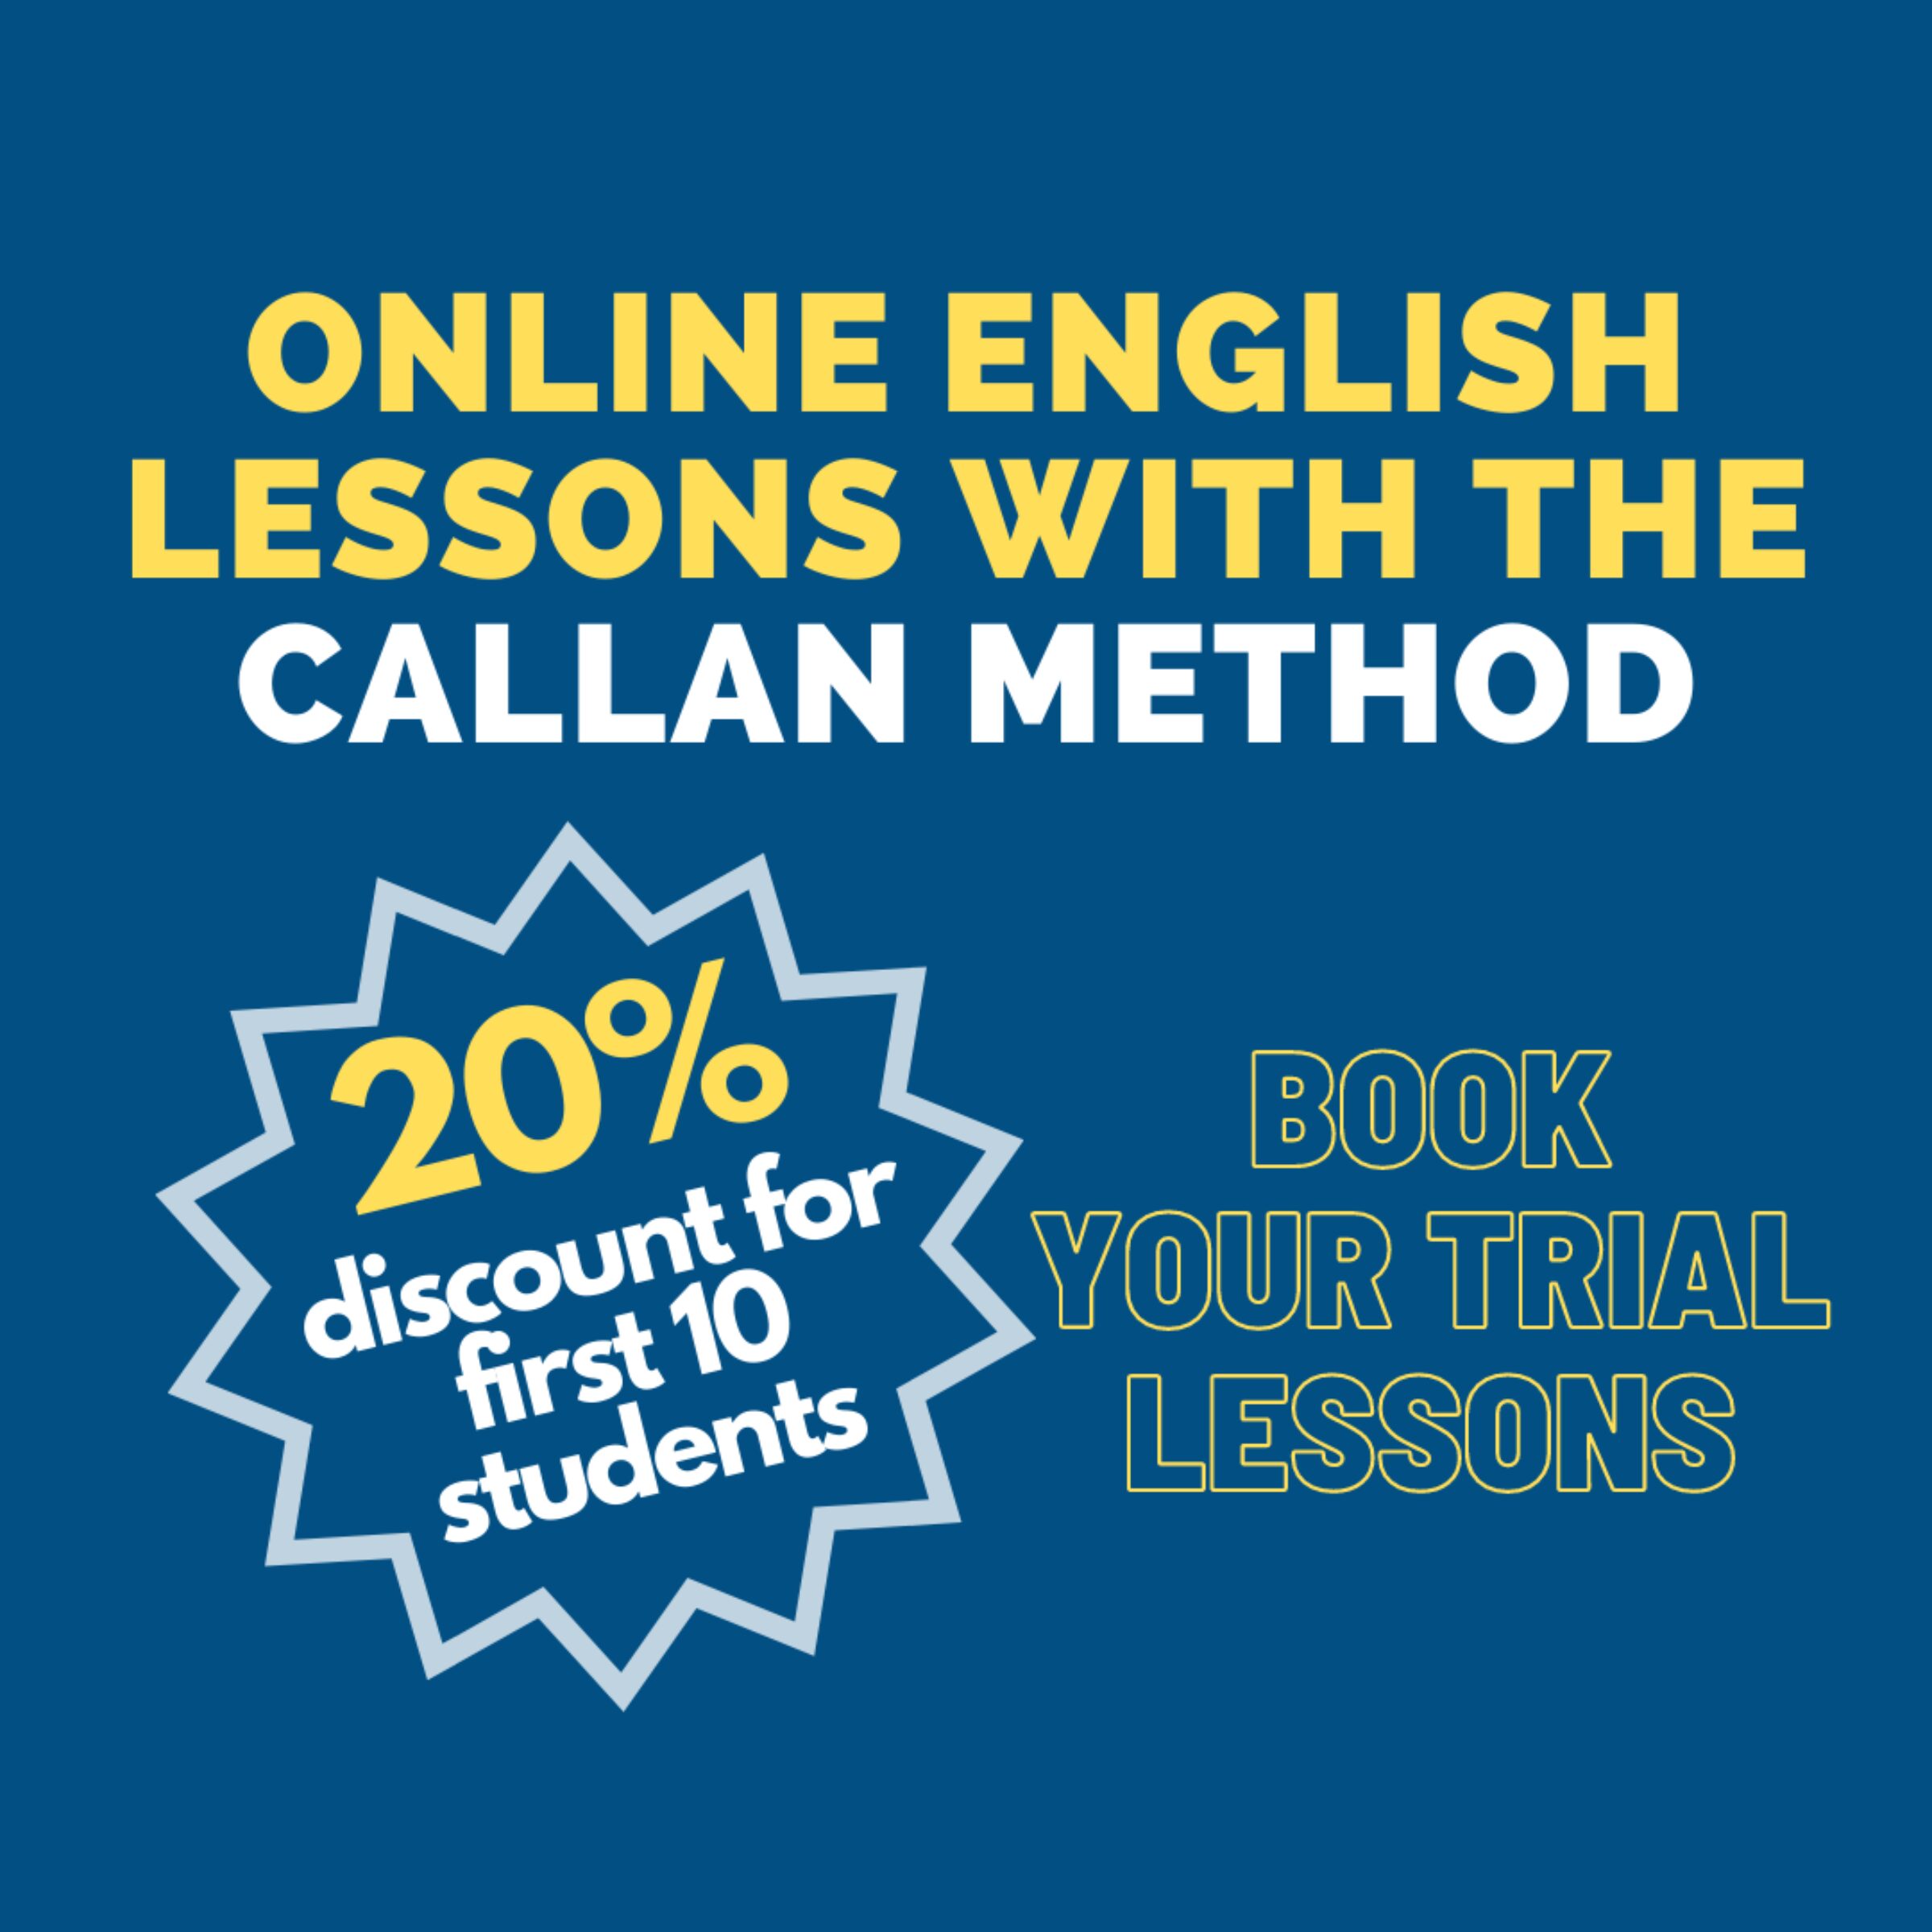 Online English lessons